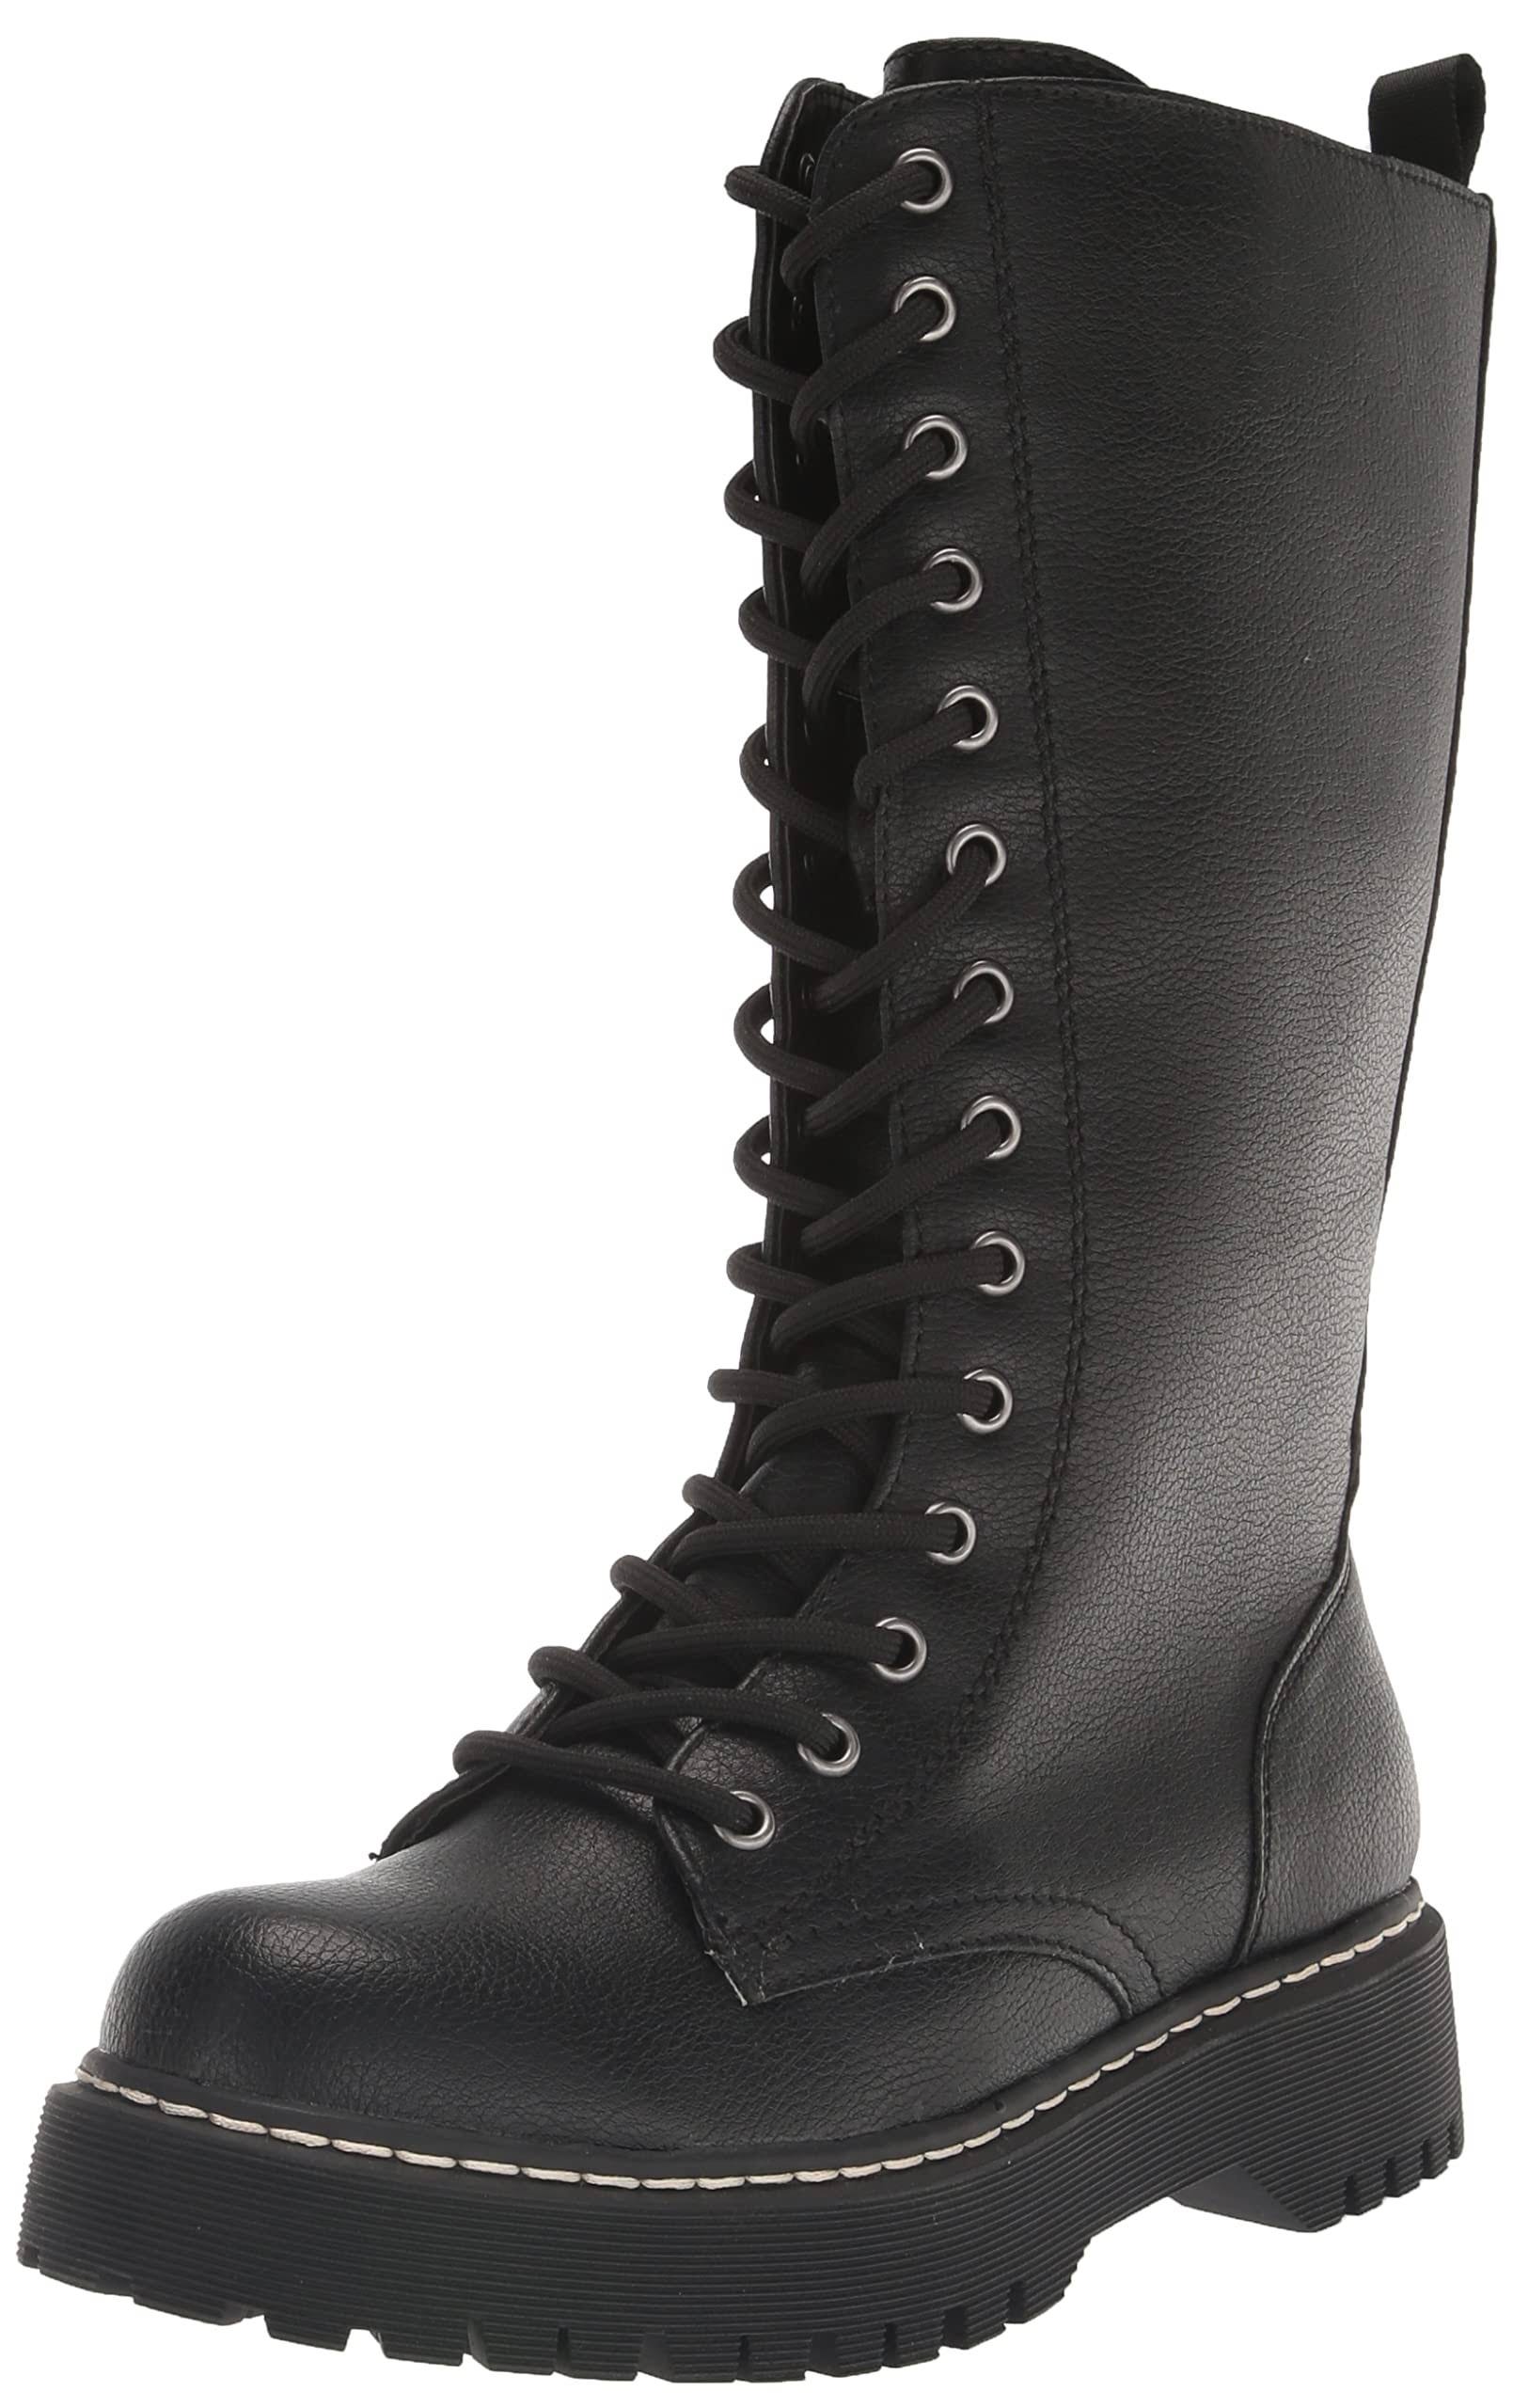 Unionbay Hall Women's Knee-High Combat Boots featuring a Rubber Sole | Image